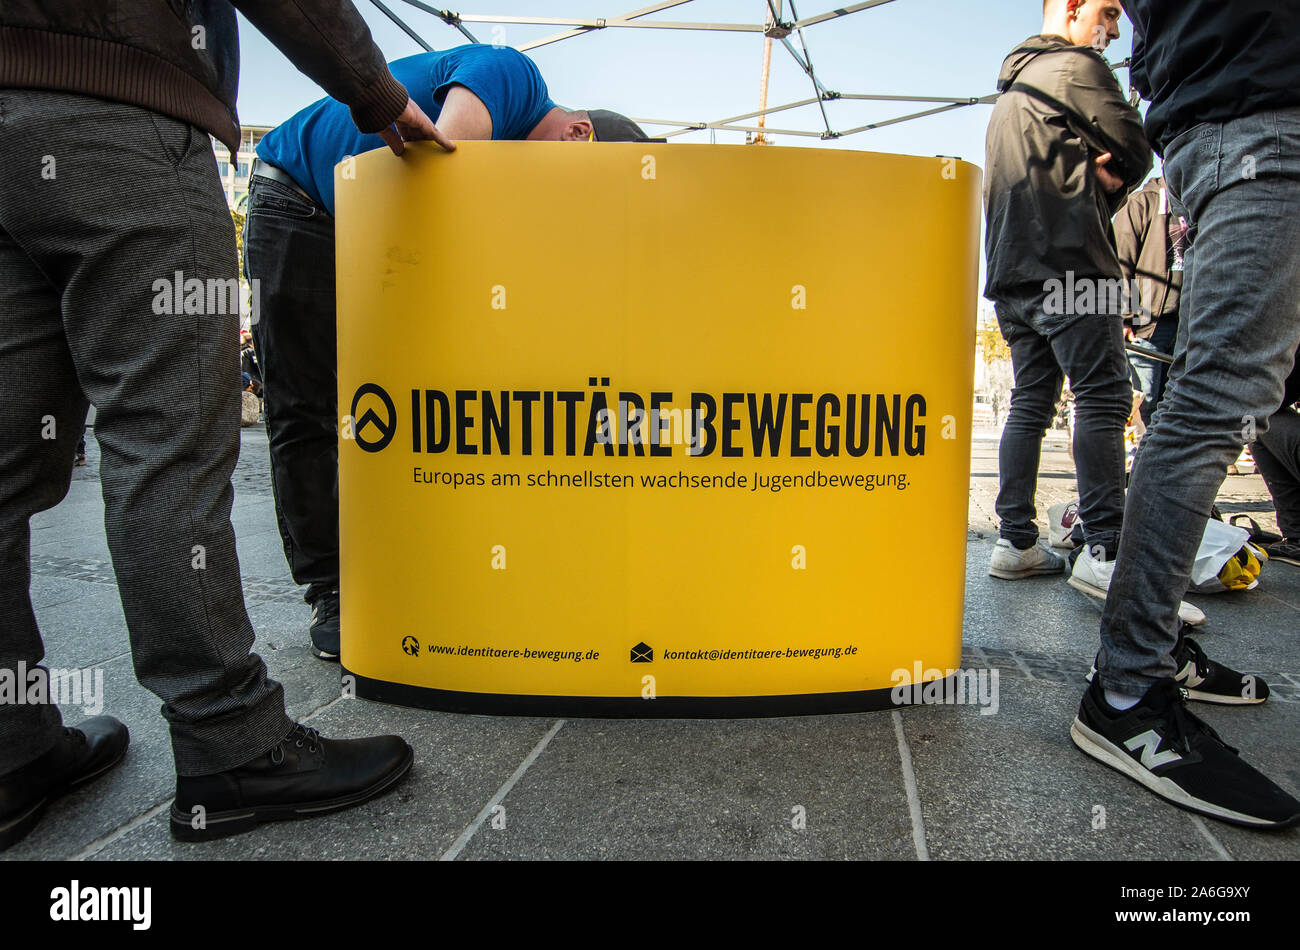 Munich, Germany. October 26, 2019, Munich, Bavaria, Germany: Logo of the Identitaere Bewegung, also known as Generation Identity. Amid protests, the right-extremist, nationalist, voelkisch Identitaere Bewegung (Generation Identity, Identitiaeren Movement) held a rally at Munich's Stachus. The Identitaere have recently faced numerous challenges, including raids to explore the connection of its head Martin Sellner to the Christ Church shooter, as well as in Germany where the IB was officially classified as 'right-extremist''. The group has renewed the use of the 'blood and soil'' (Blut Stock Photo